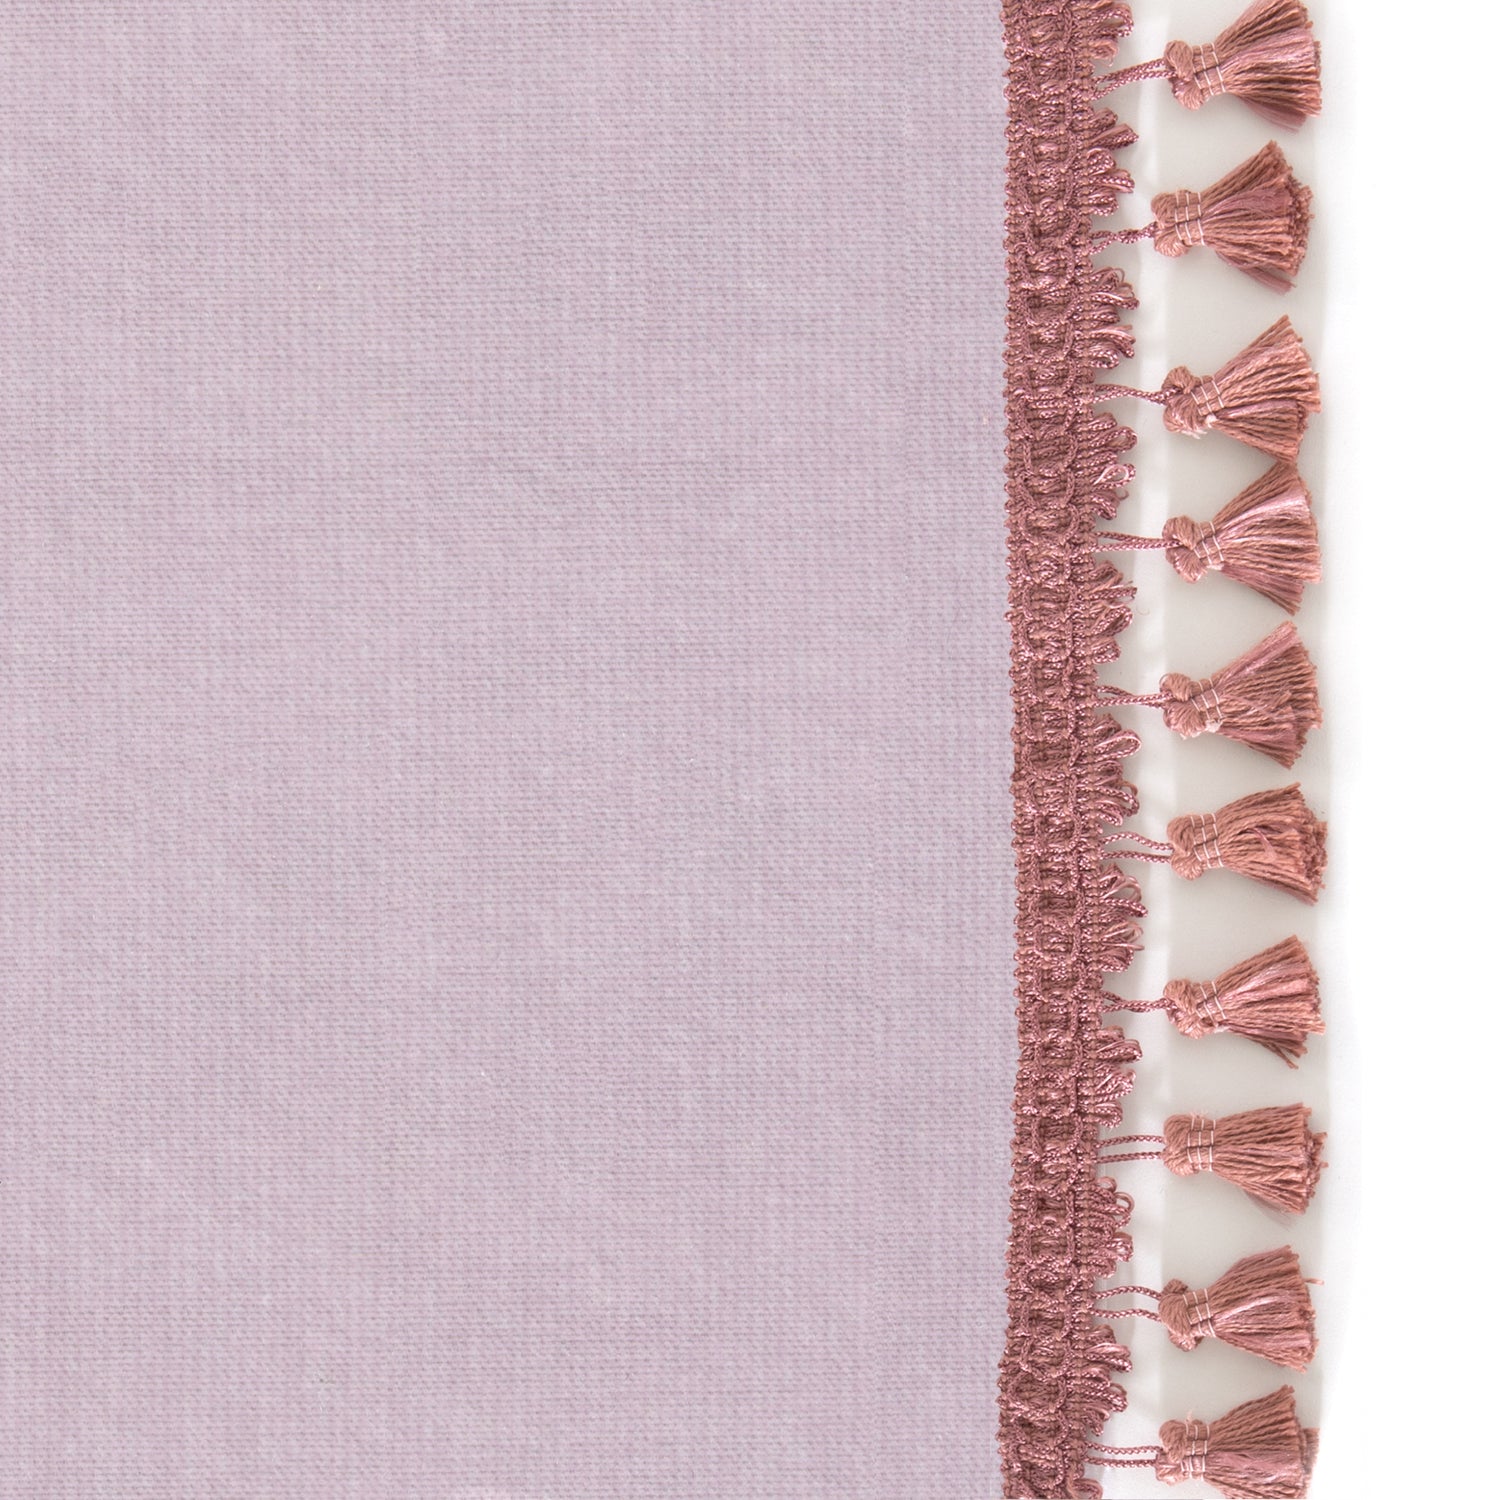 Upclose picture of Lilac Velvet custom curtain with dusty rose tassel trim